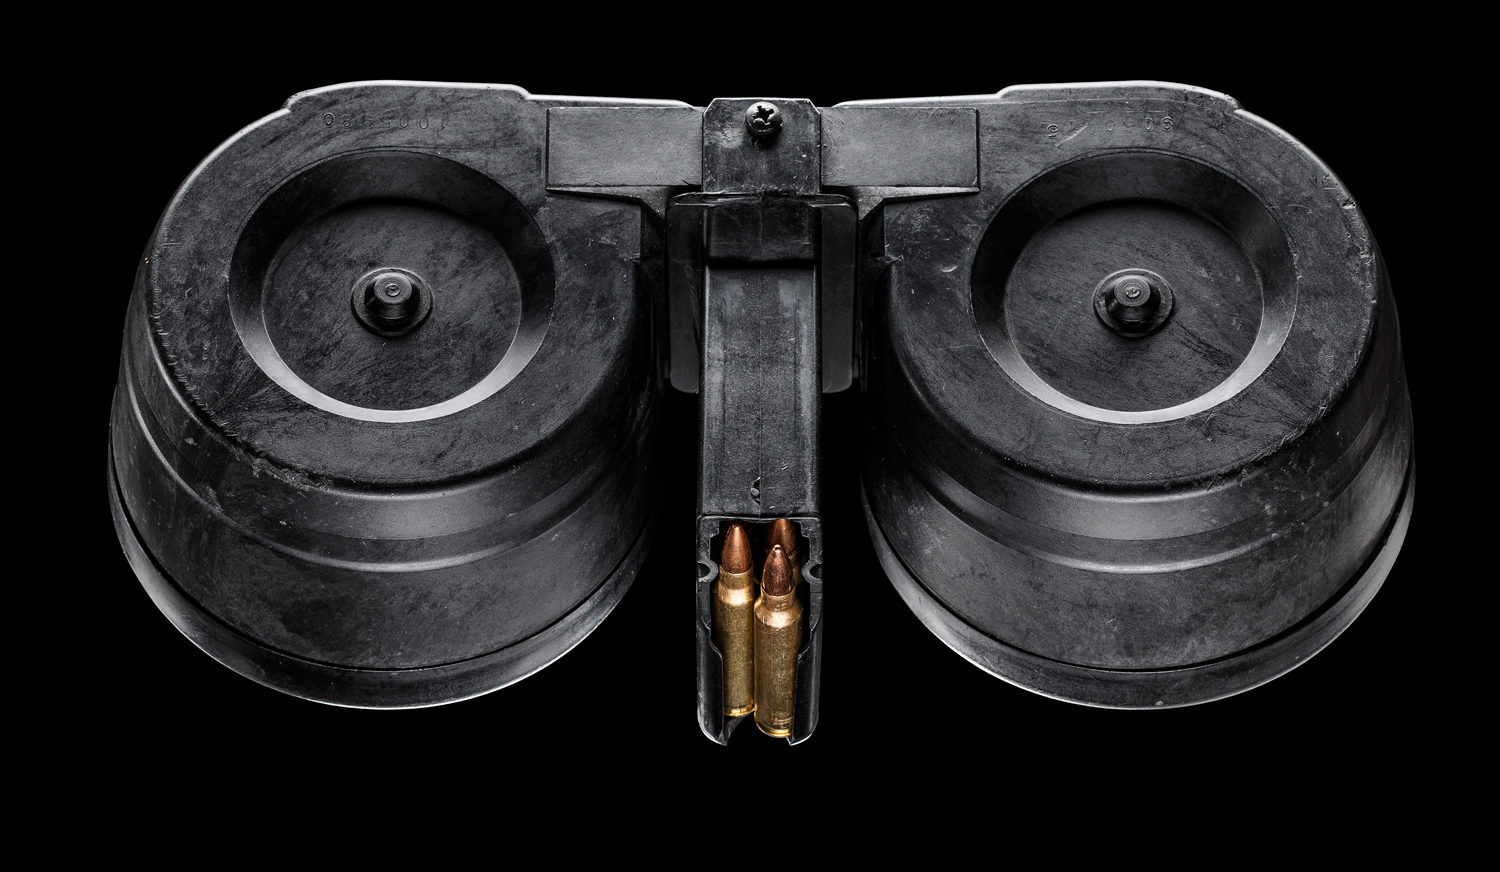 A 100 round drum magazine loaded with .223 Caliber ammunition, similar to the one allegedly used by James Holmes in the Aurora, Colo. shooting on July 20, 2012.